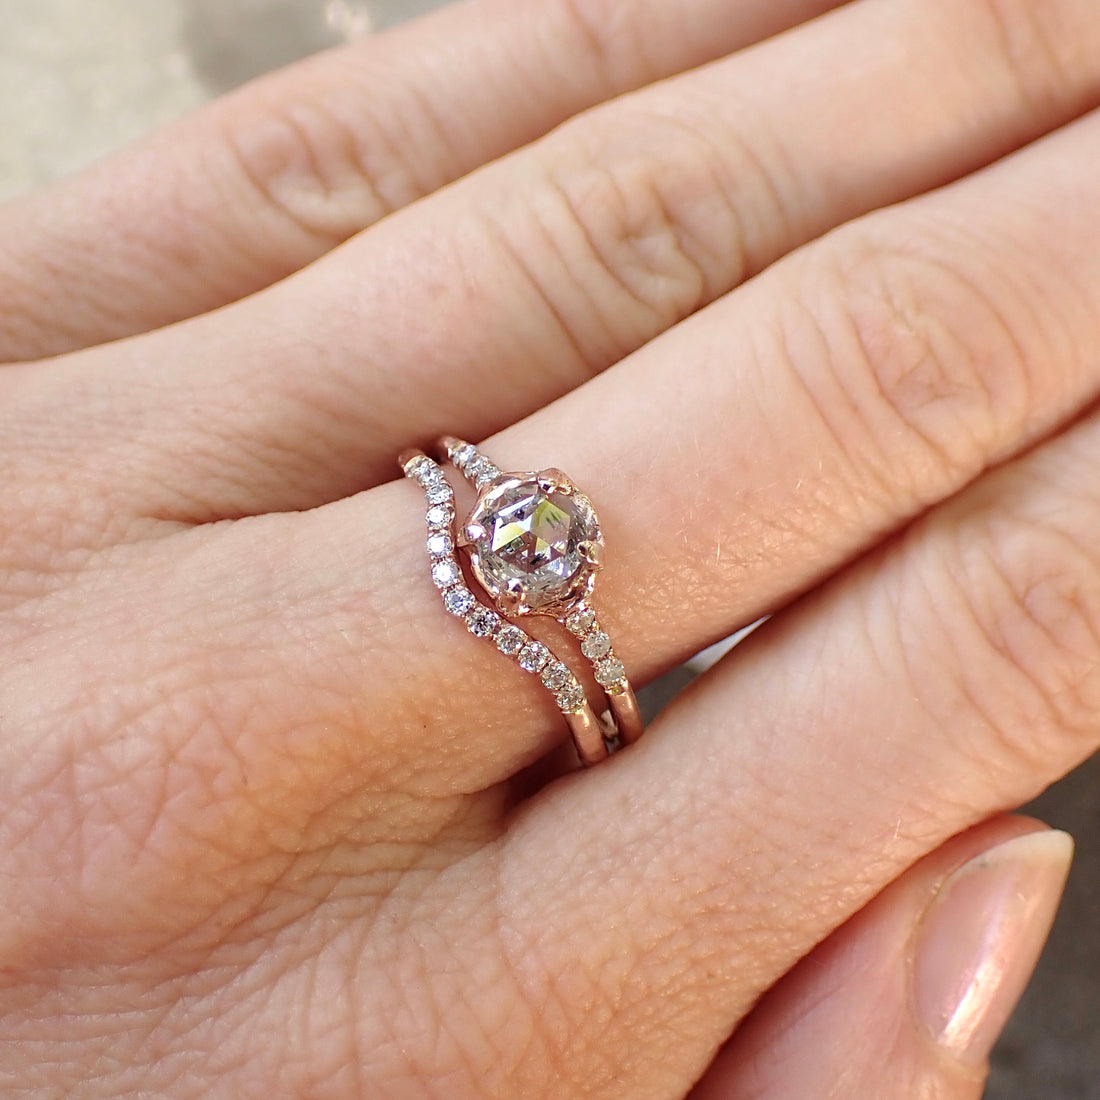 Salt and Pepper Round Diamond ring set, Hand Carved in 14k Rose Gold.